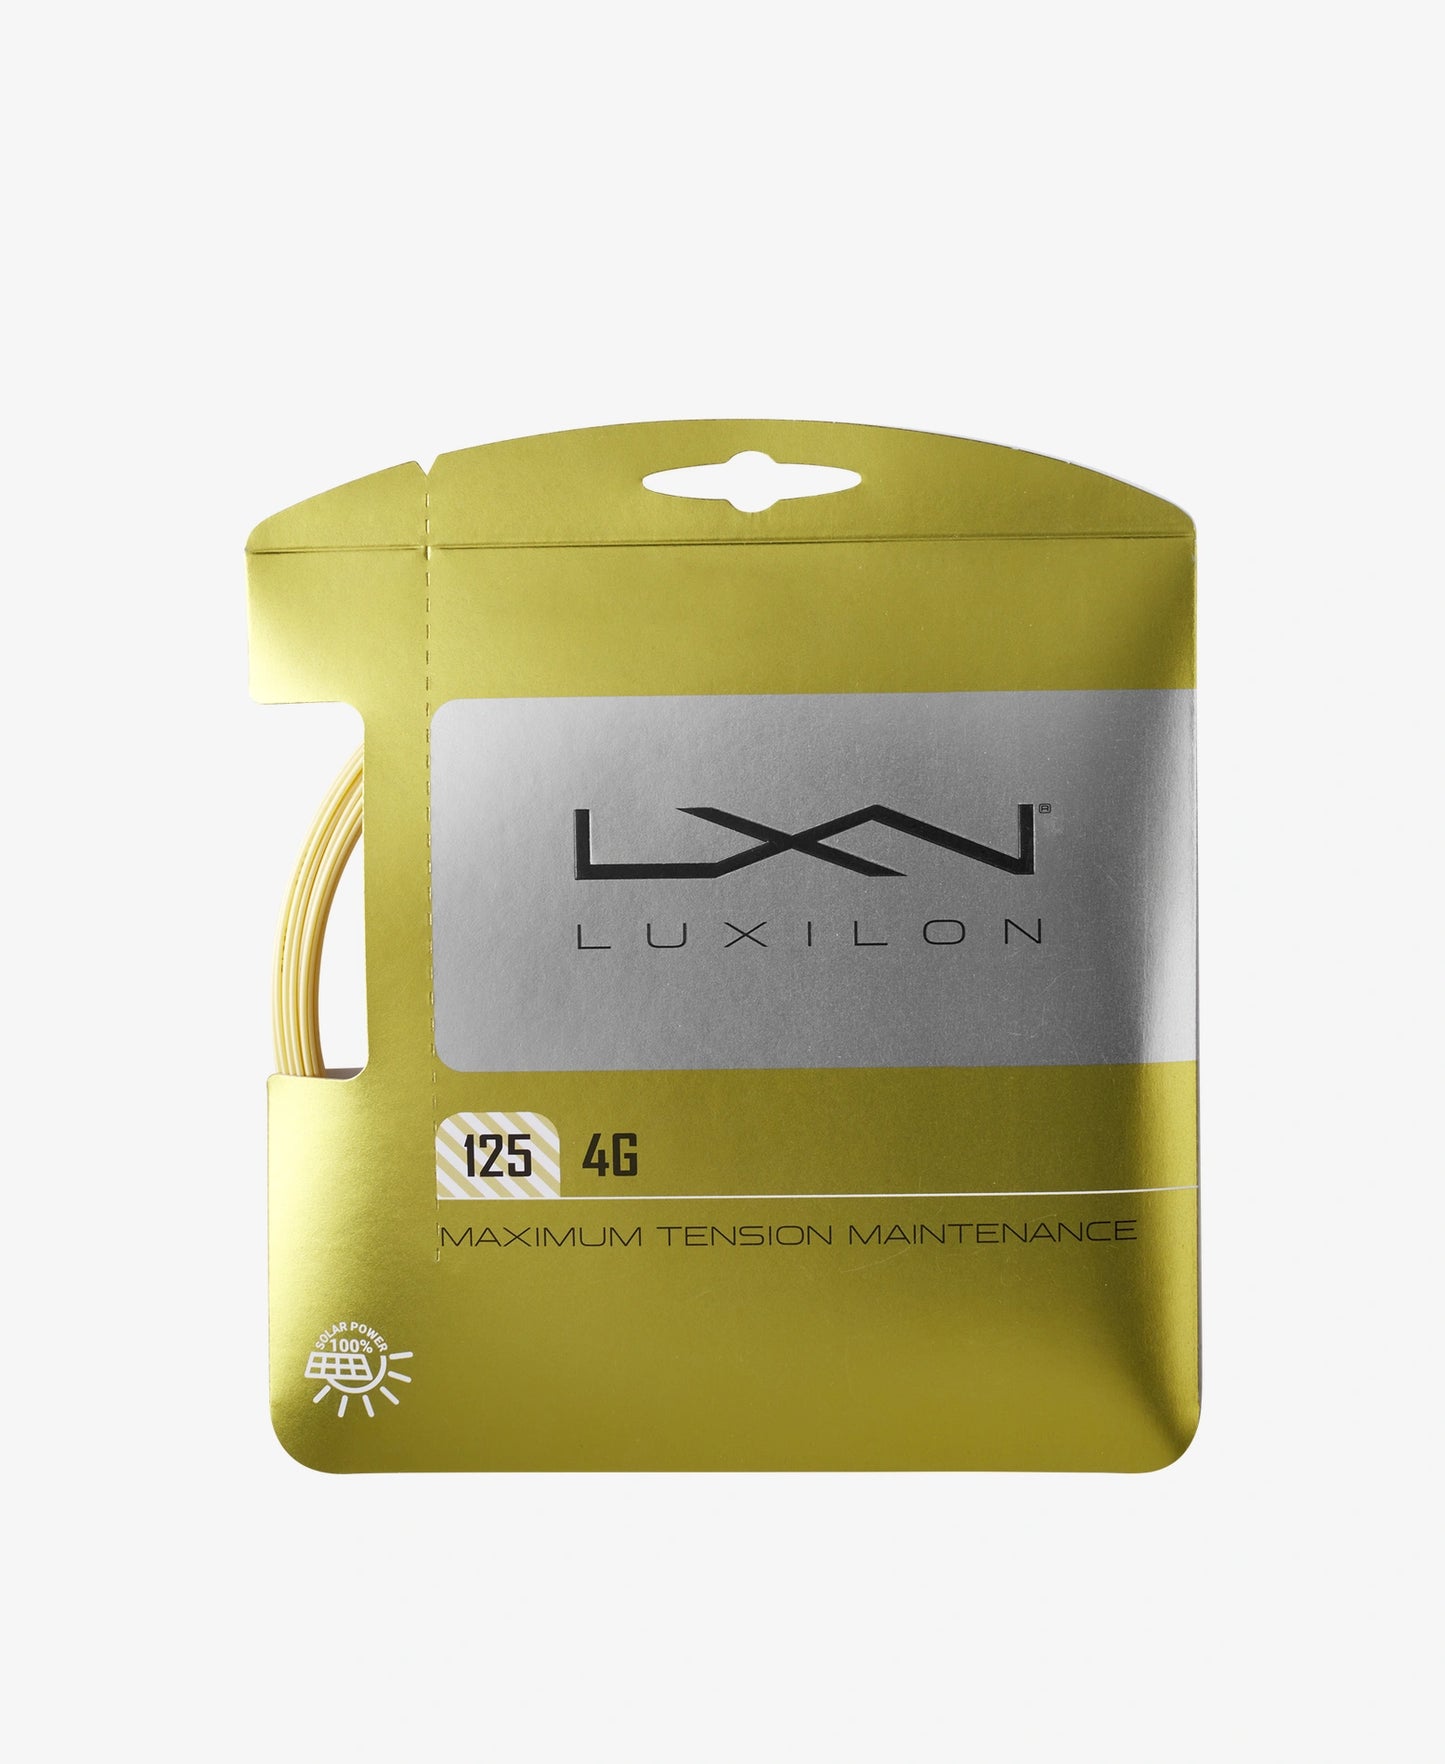 The Luxilon 4G 125 Tennis String-Set available for sale at GSM Sports. 